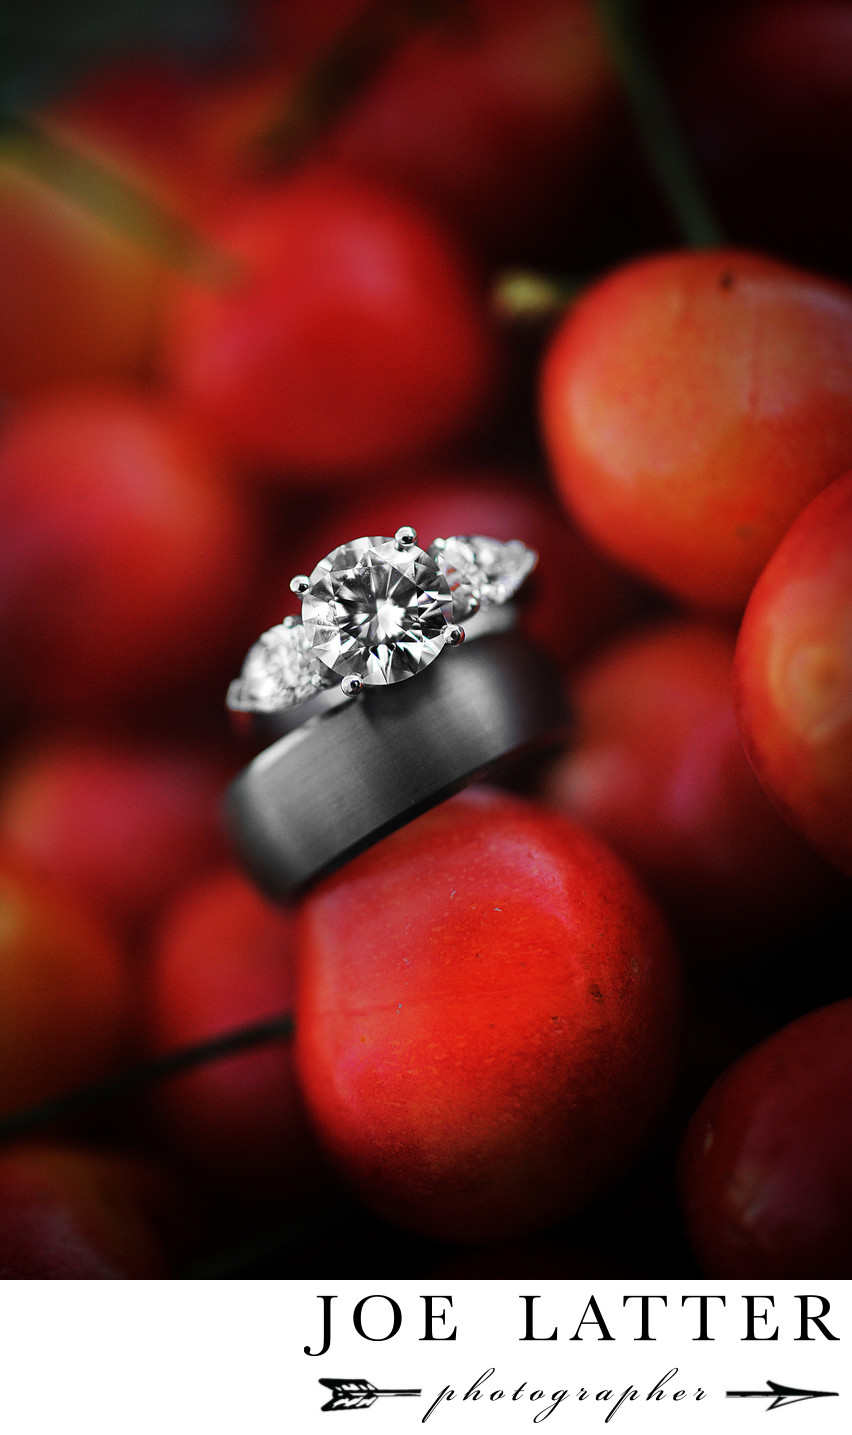 This is an image of a bride’s wedding ring and a groom’s wedding band photographed in a bowl of red cherries.